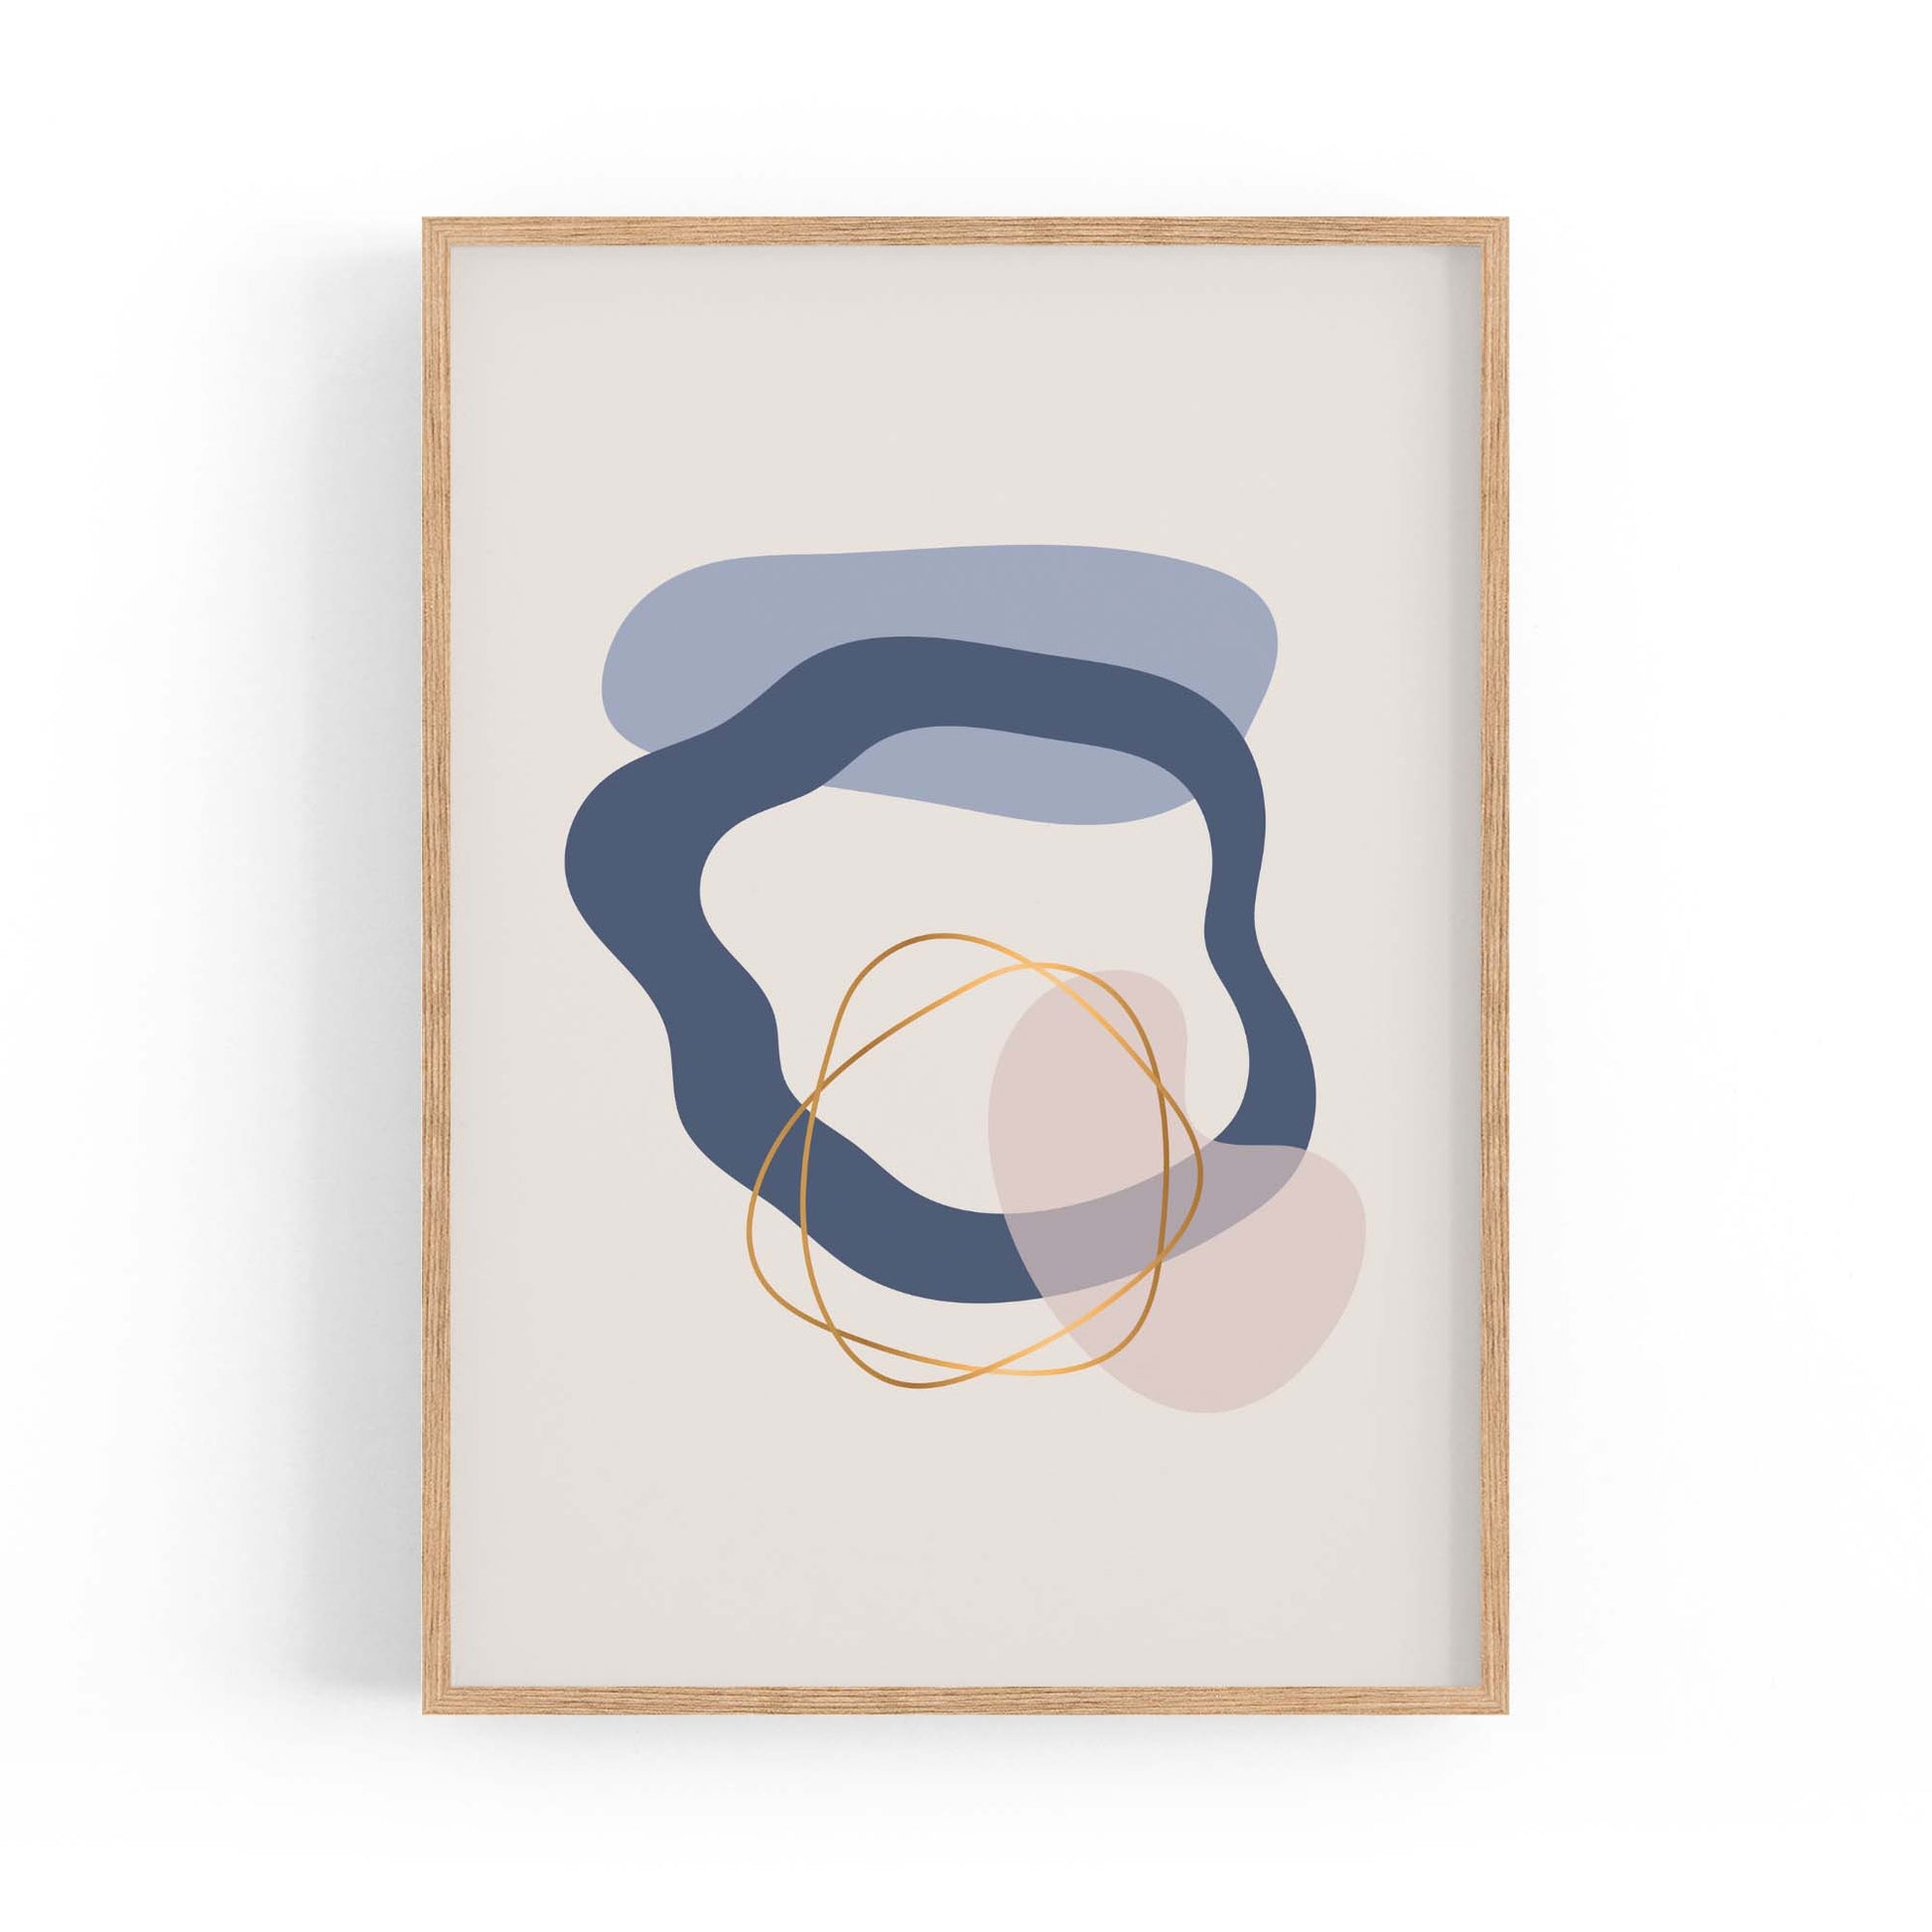 Pale Abstract Shapes Wall Art #4 - The Affordable Art Company